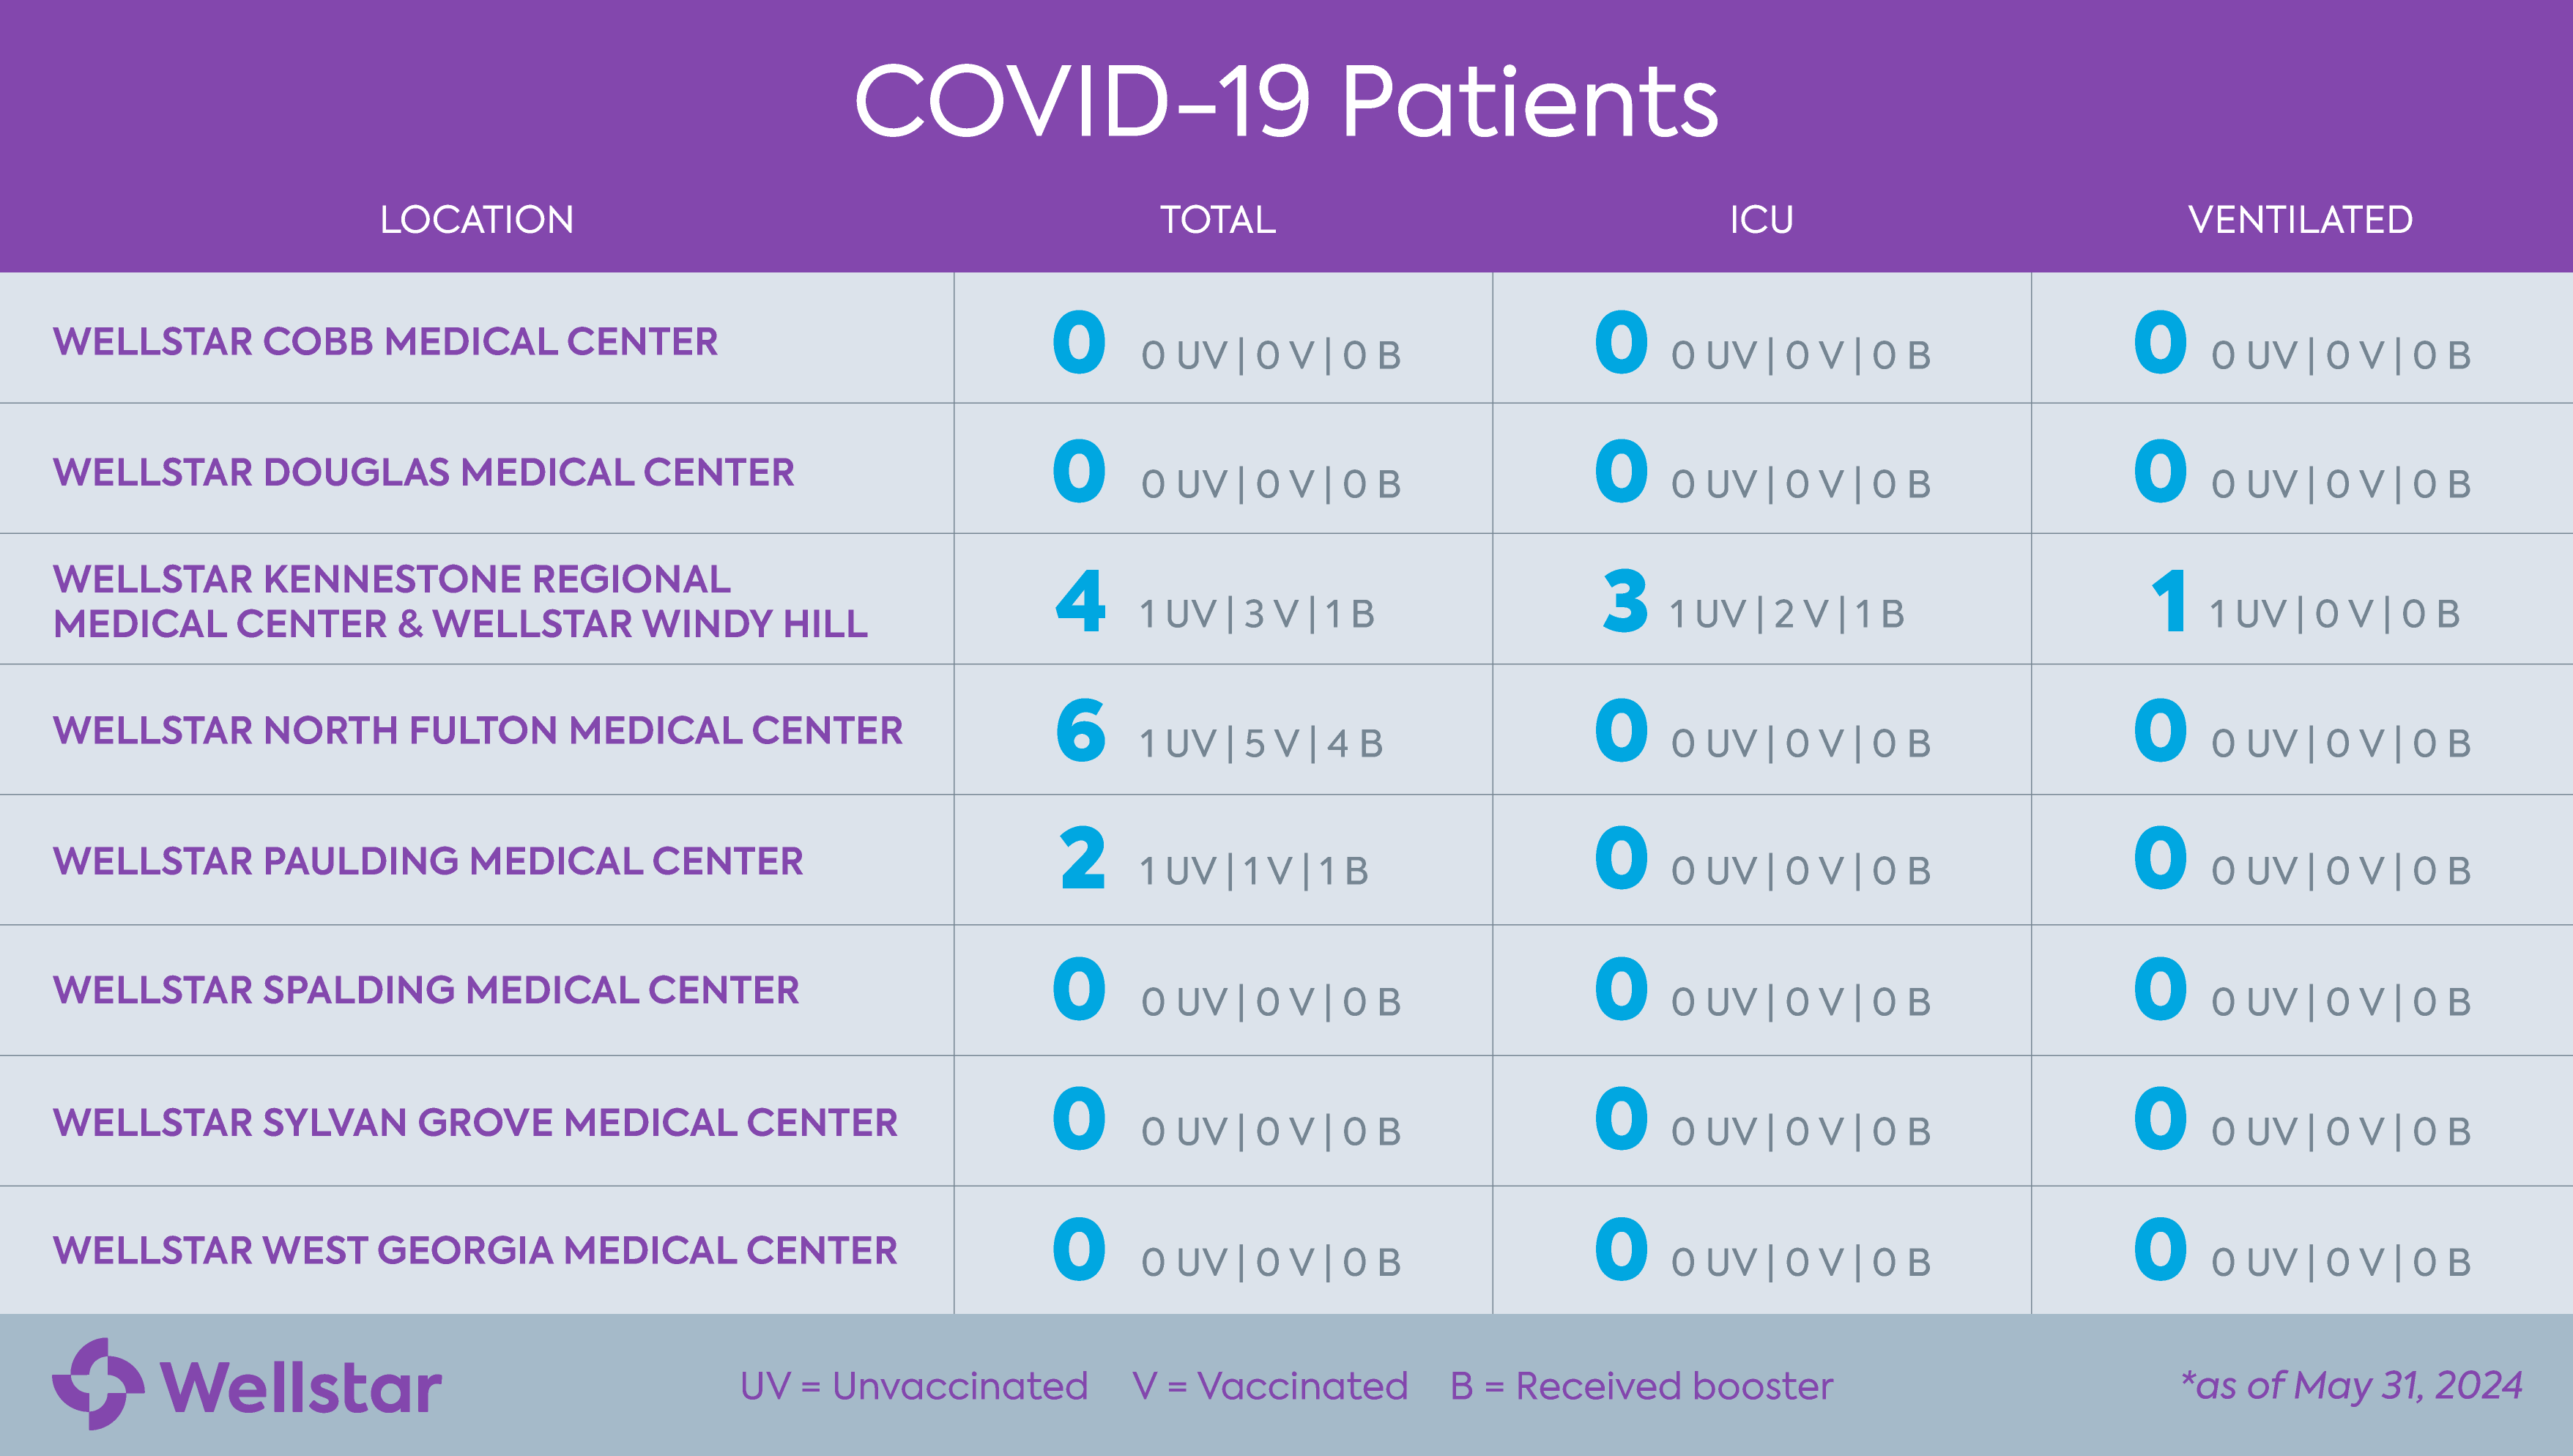 List of all Wellstar hospital locations and their corresponding COVID-19 numbers